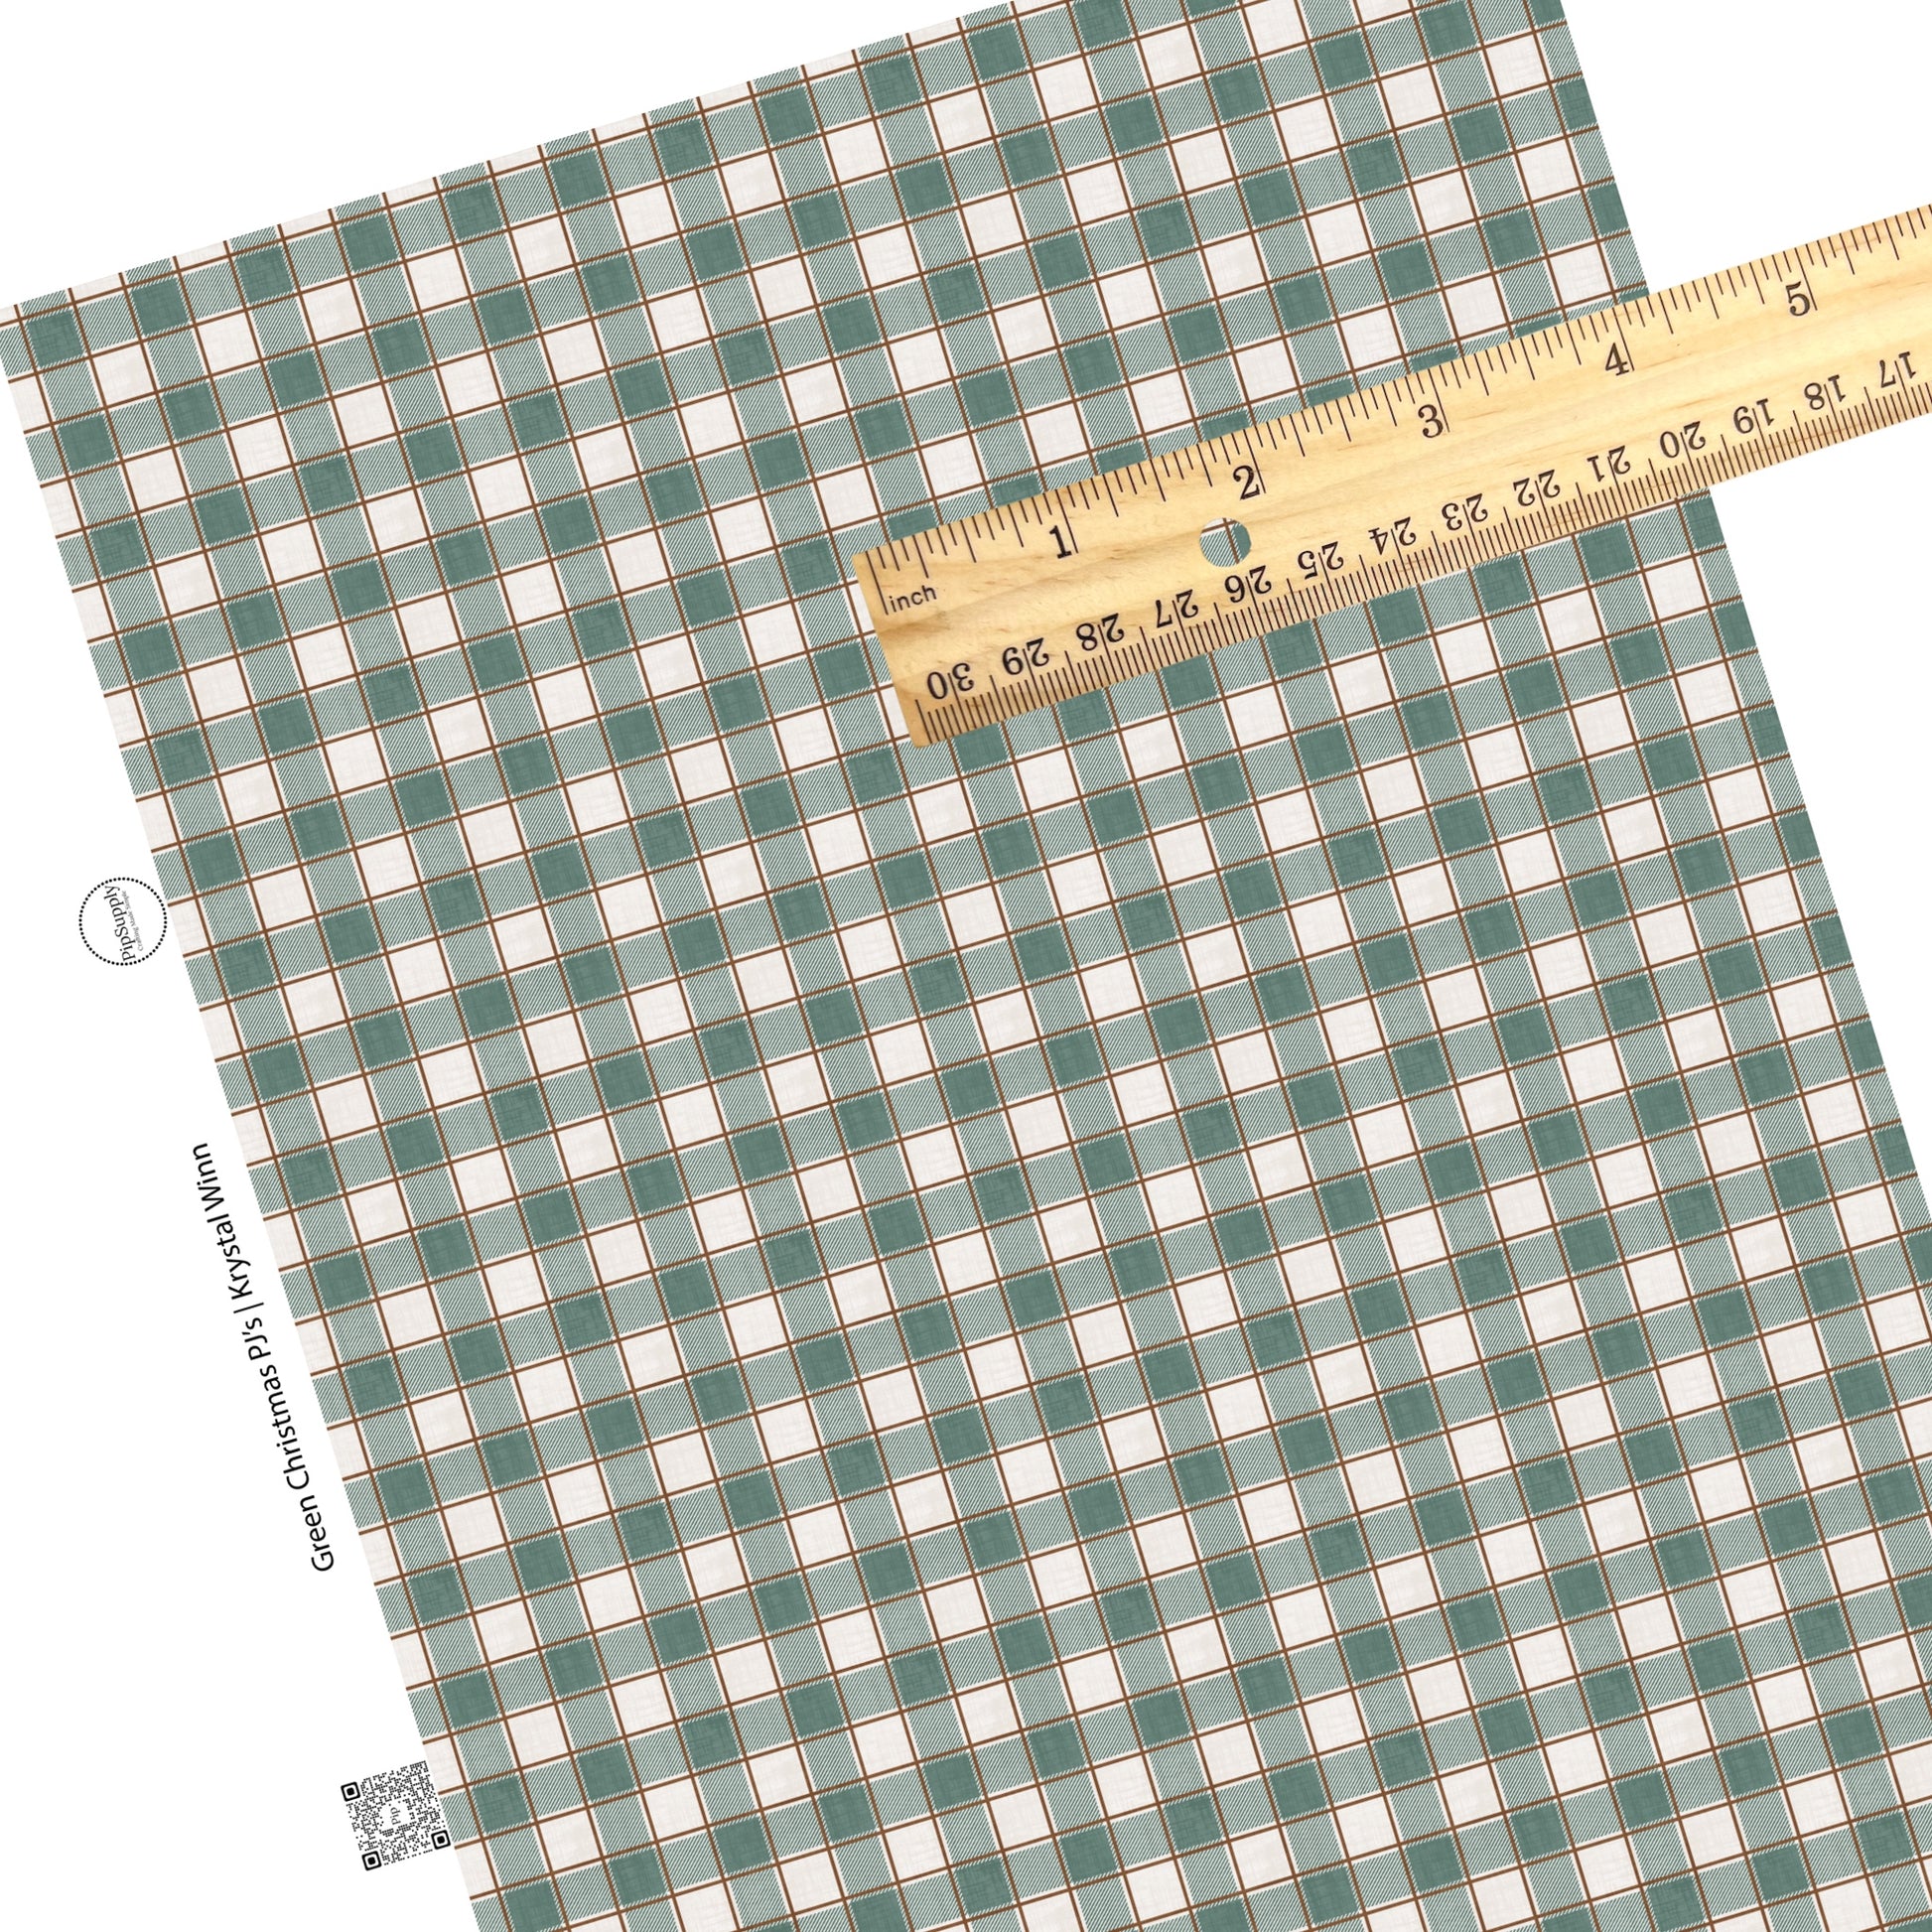 These holiday themed faux leather sheets contain the following design elements: Christmas green and cream plaid. Our CPSIA compliant faux leather sheets or rolls can be used for all types of crafting projects.